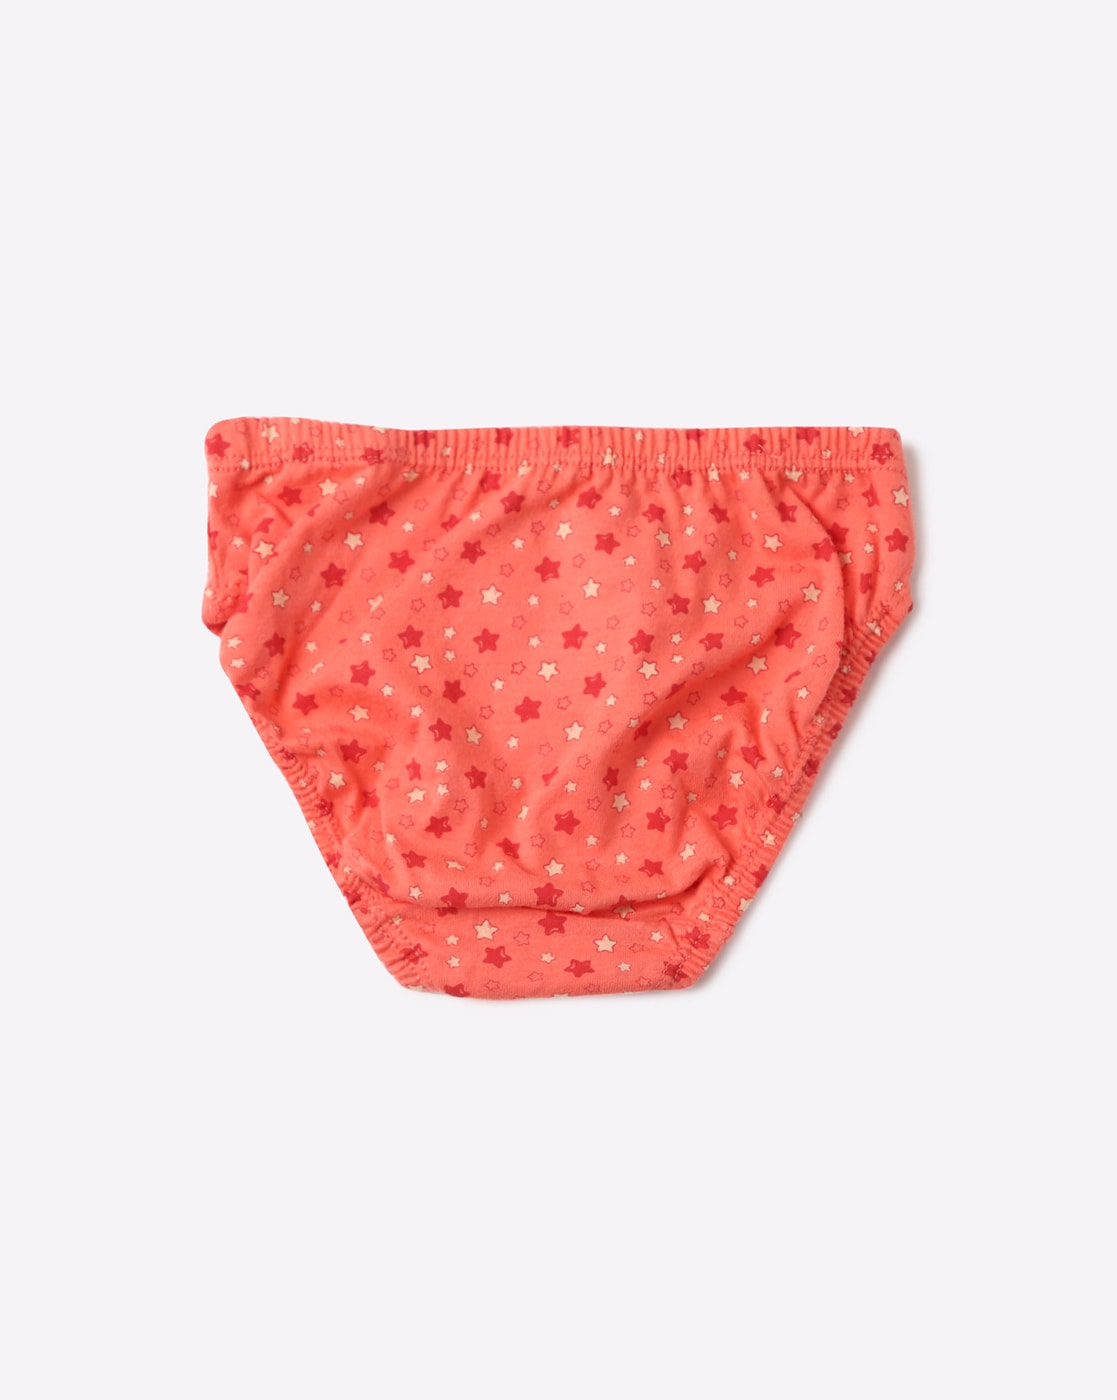 Buy Assorted Panties & Bloomers for Girls by RIO GIRLS Online